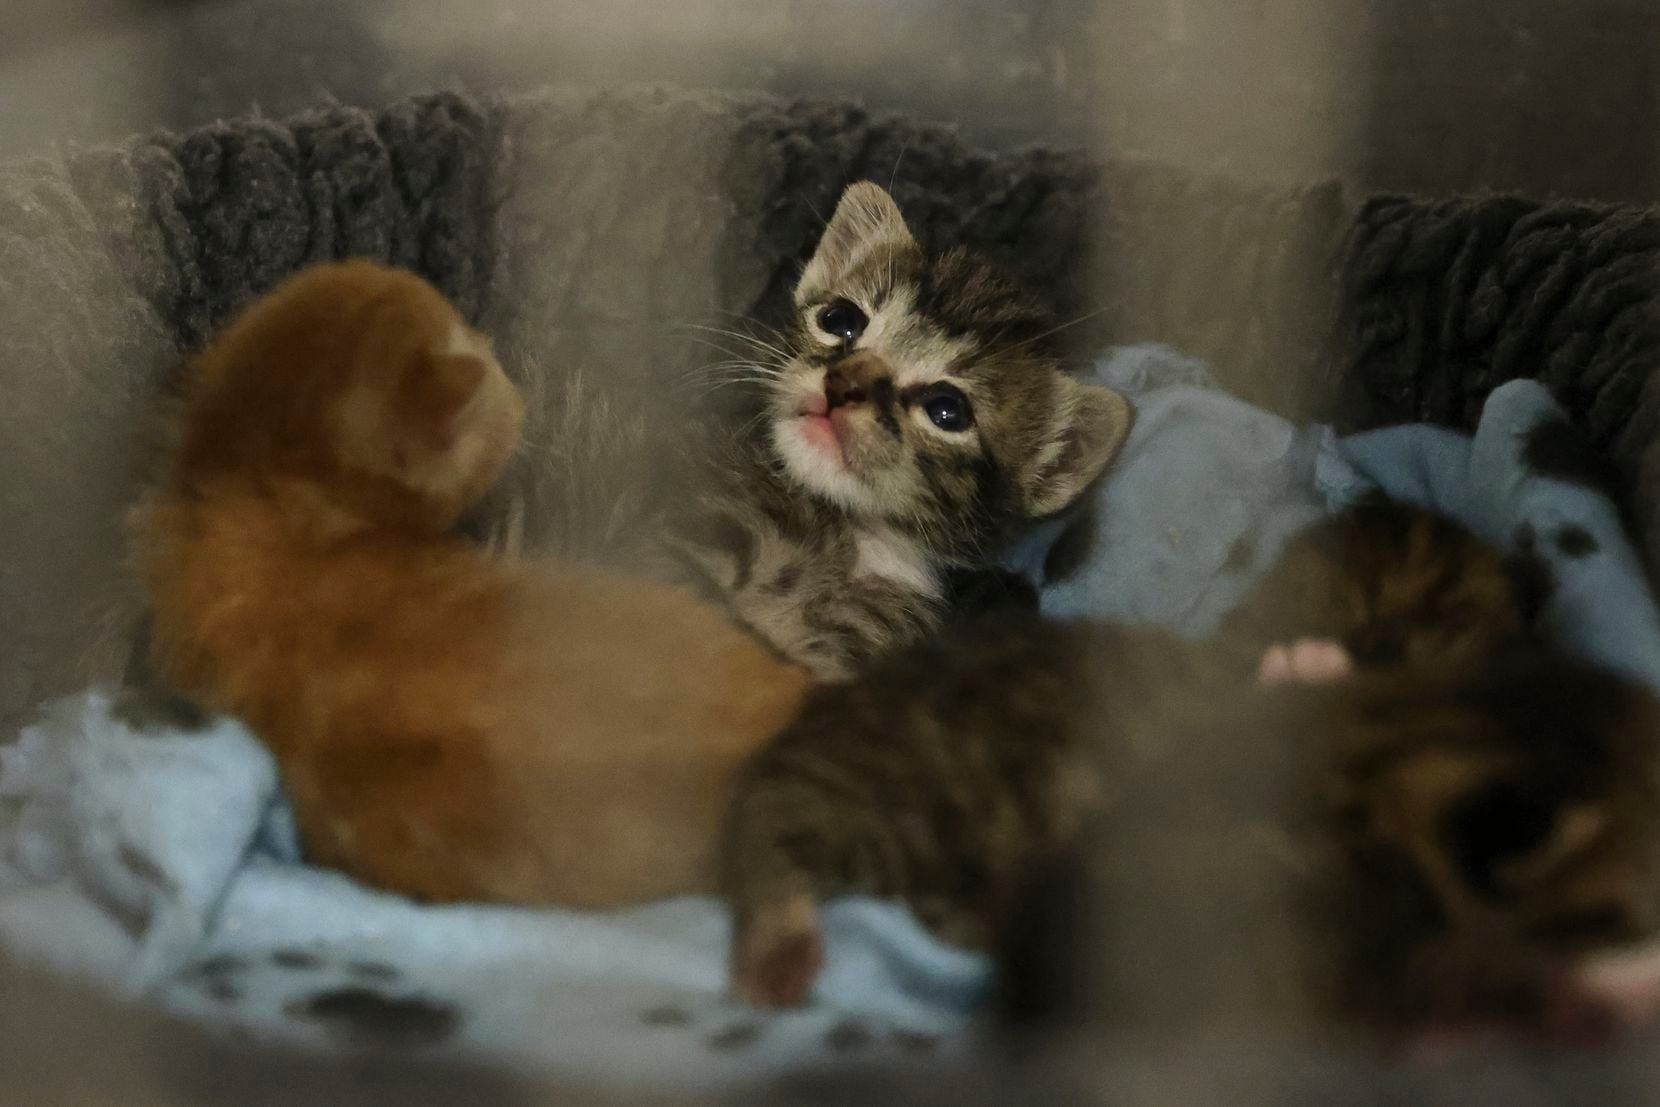 A litter of kittens in the Dallas Animal Services nursery on Wednesday.